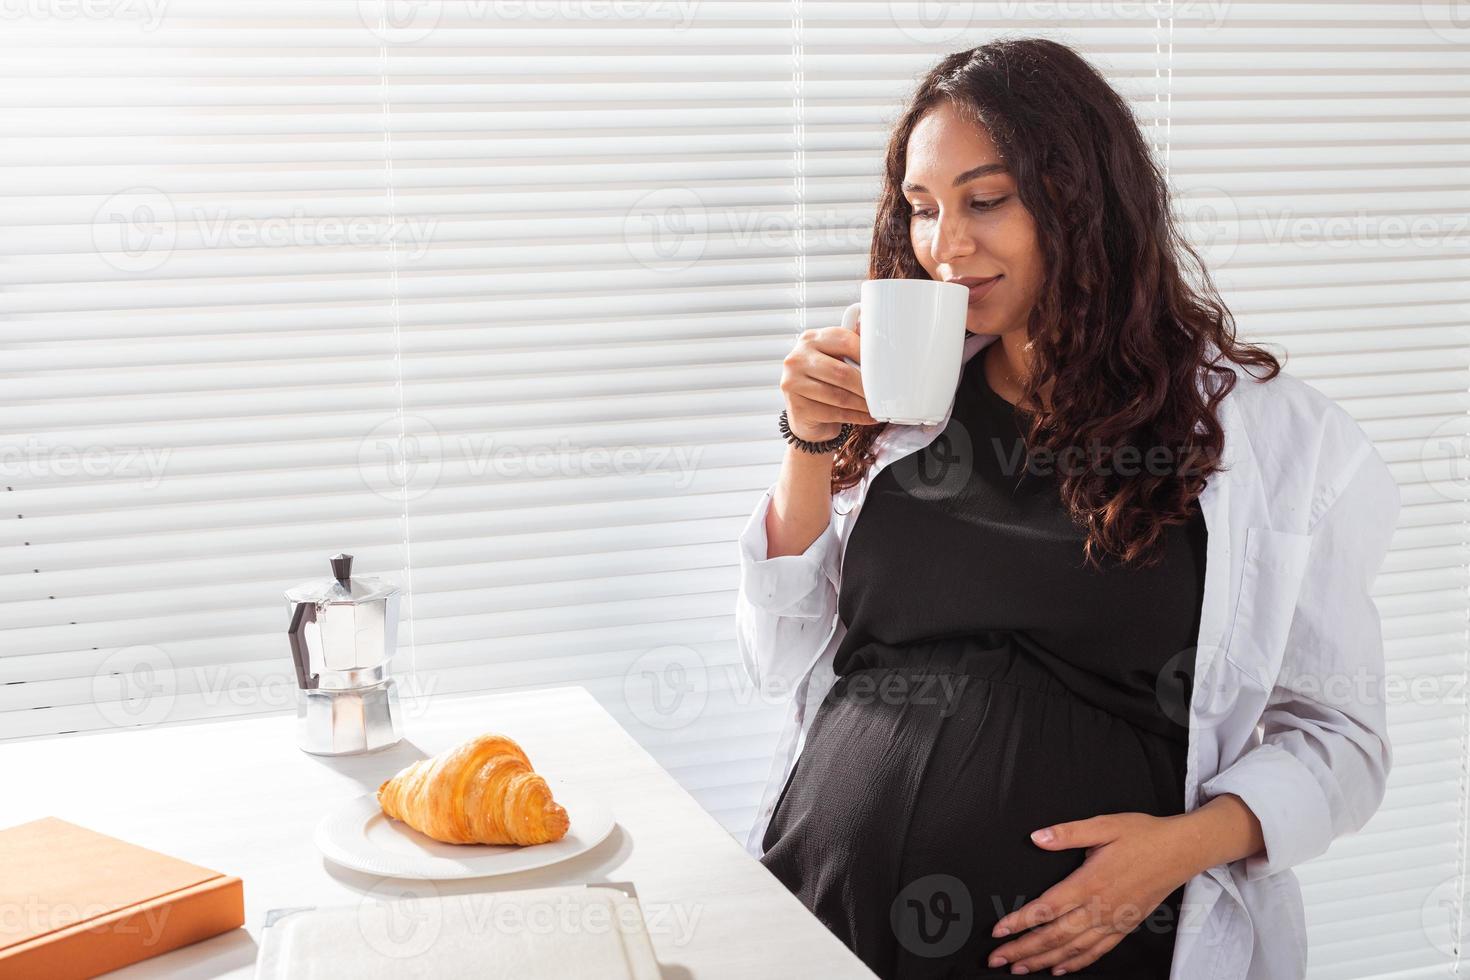 Pregnant woman eating breakfast. Pregnancy and maternity leave photo